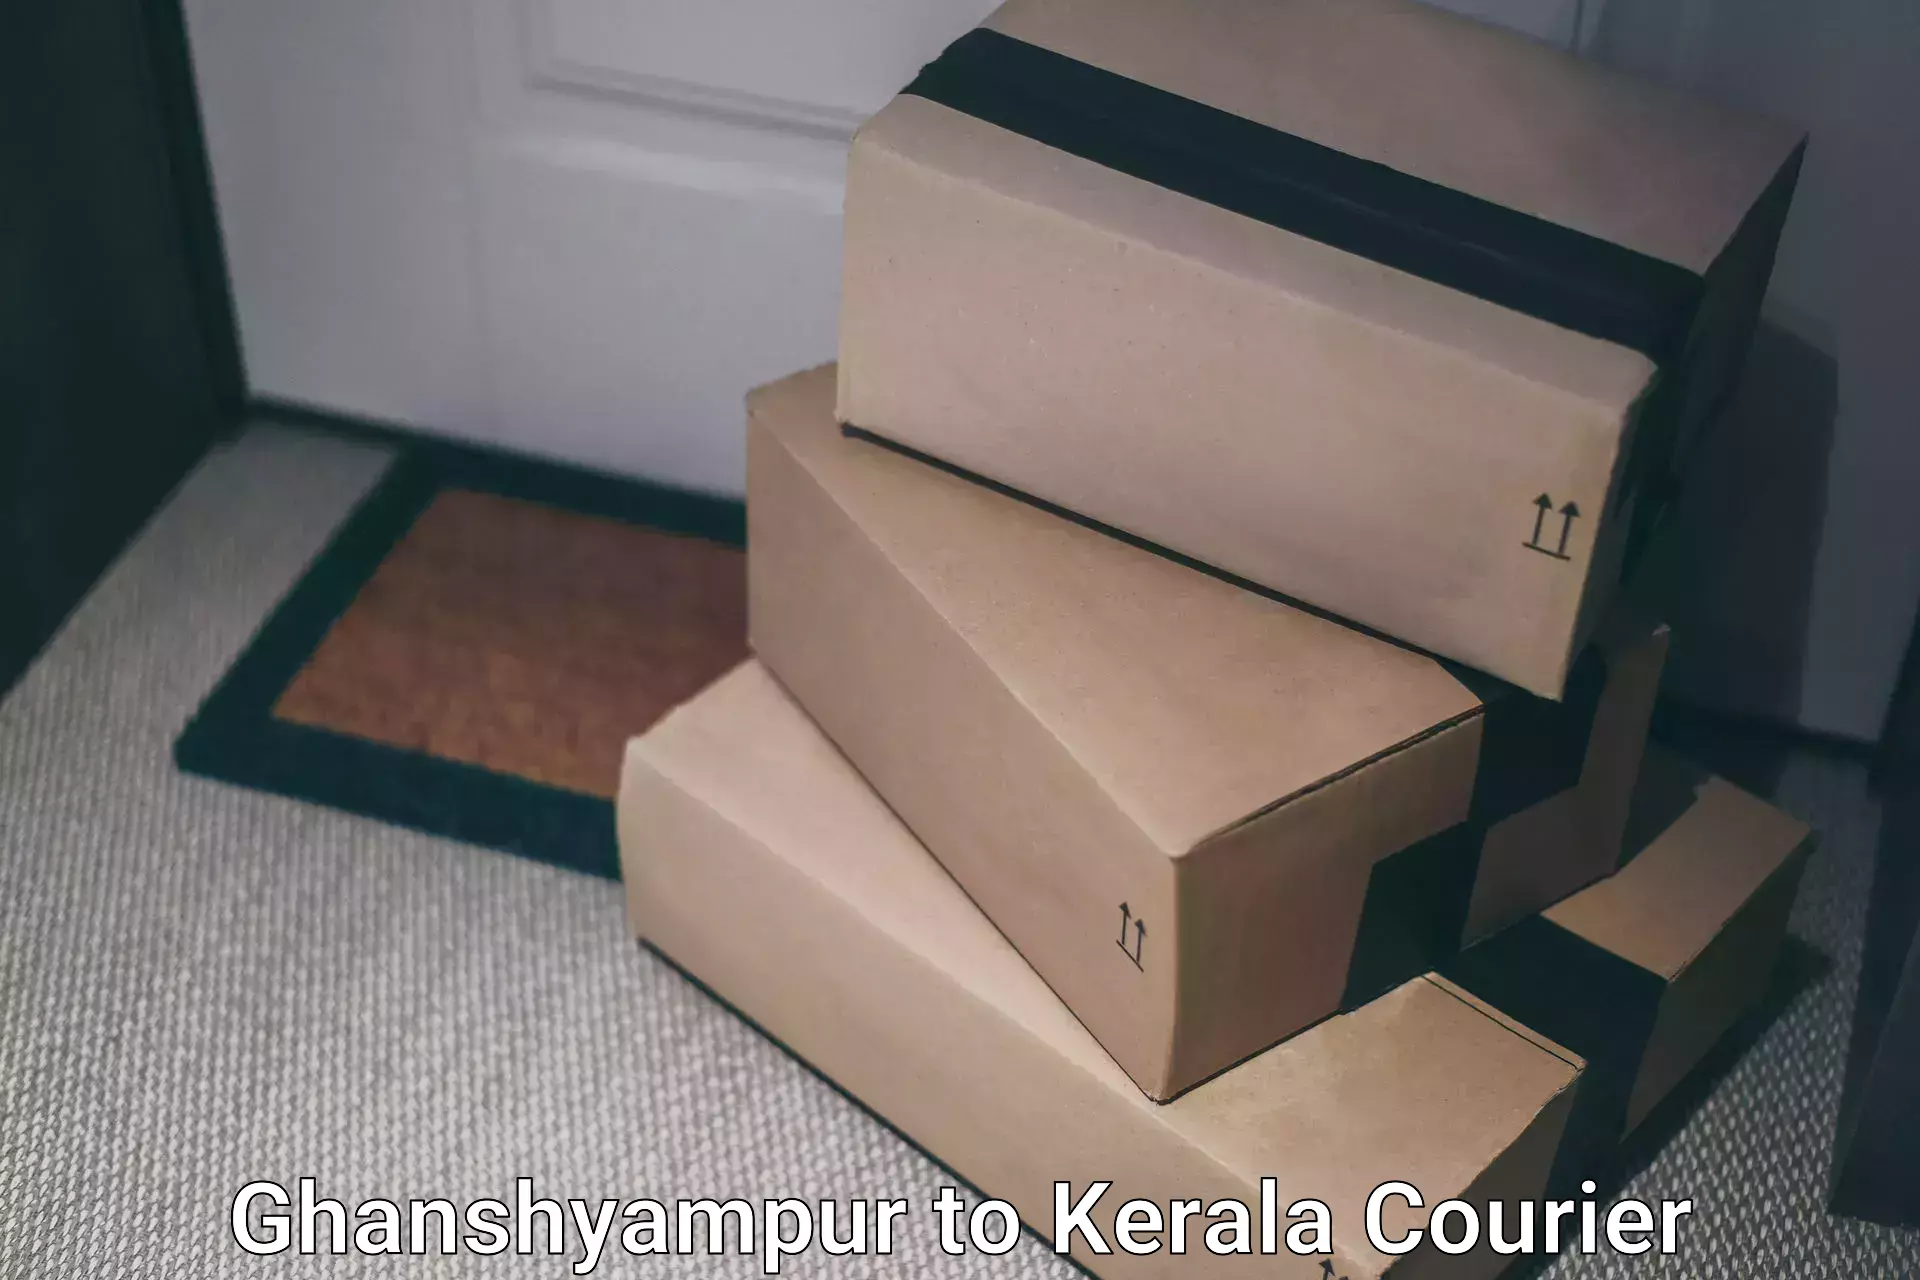 User-friendly delivery service Ghanshyampur to Thodupuzha